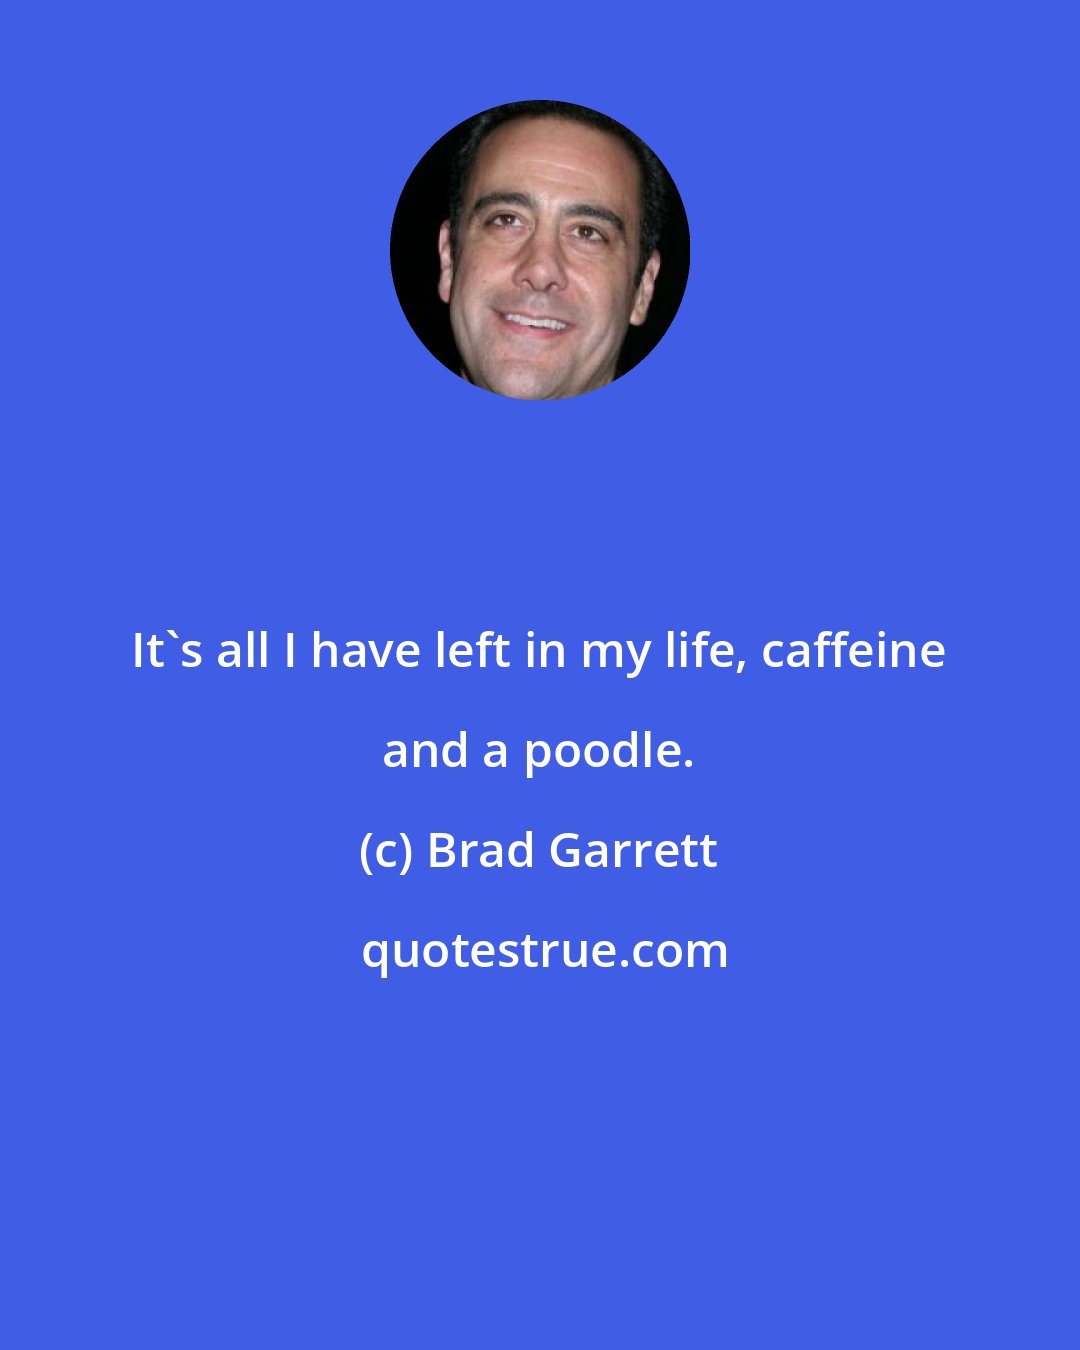 Brad Garrett: It's all I have left in my life, caffeine and a poodle.